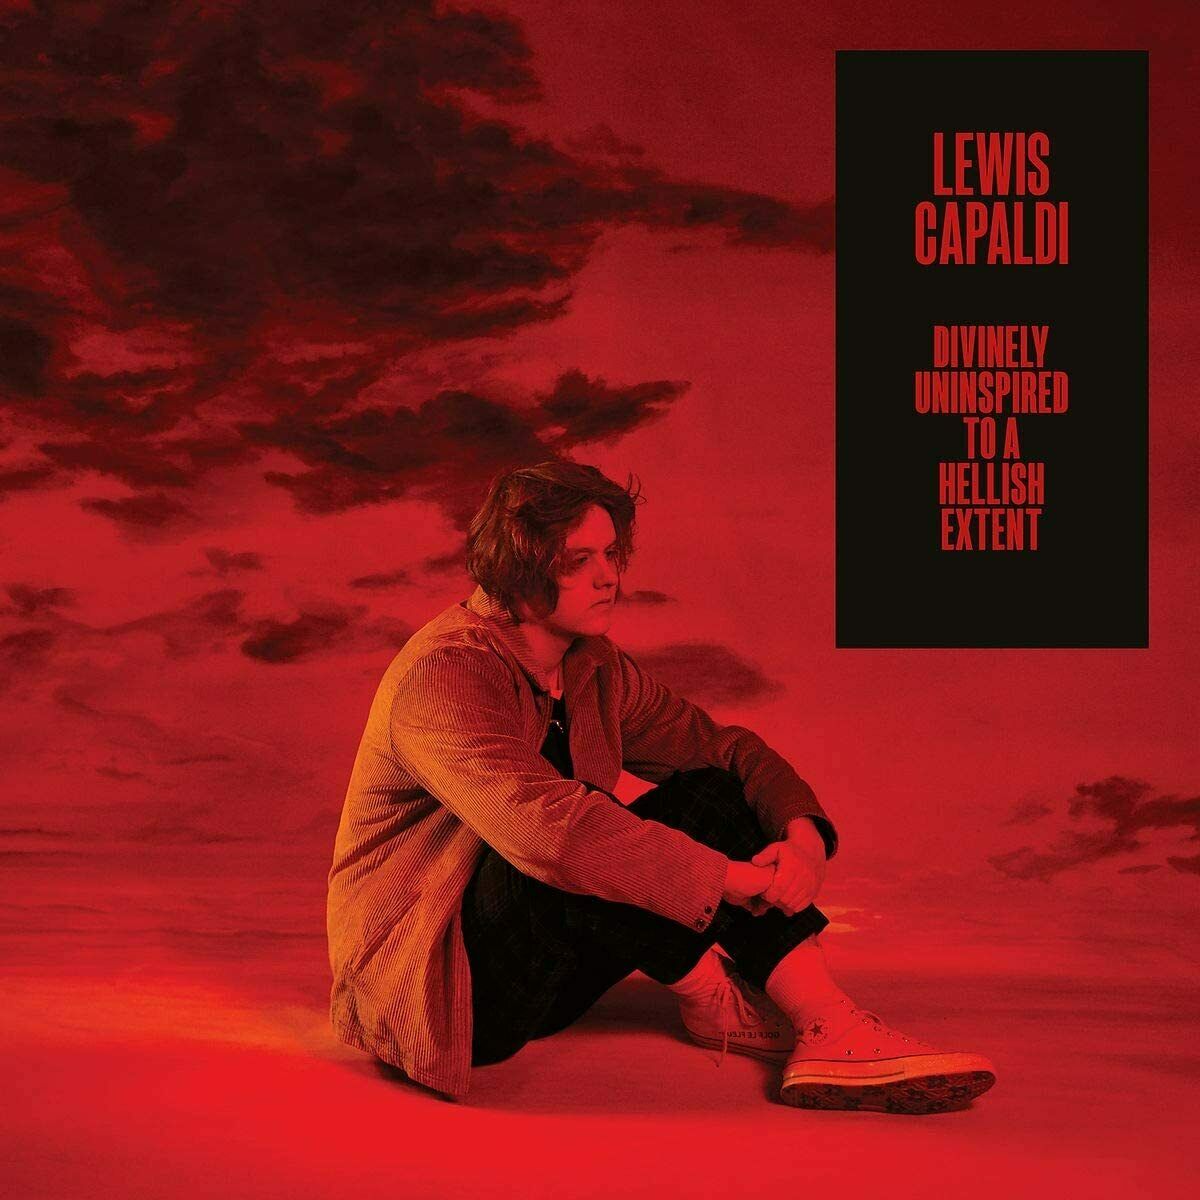 LEWIS CAPALDI - Divinely Unispired To A Hellish Extent - 2LP - Limited Clear Vinyl [RSD2020-OCT24]